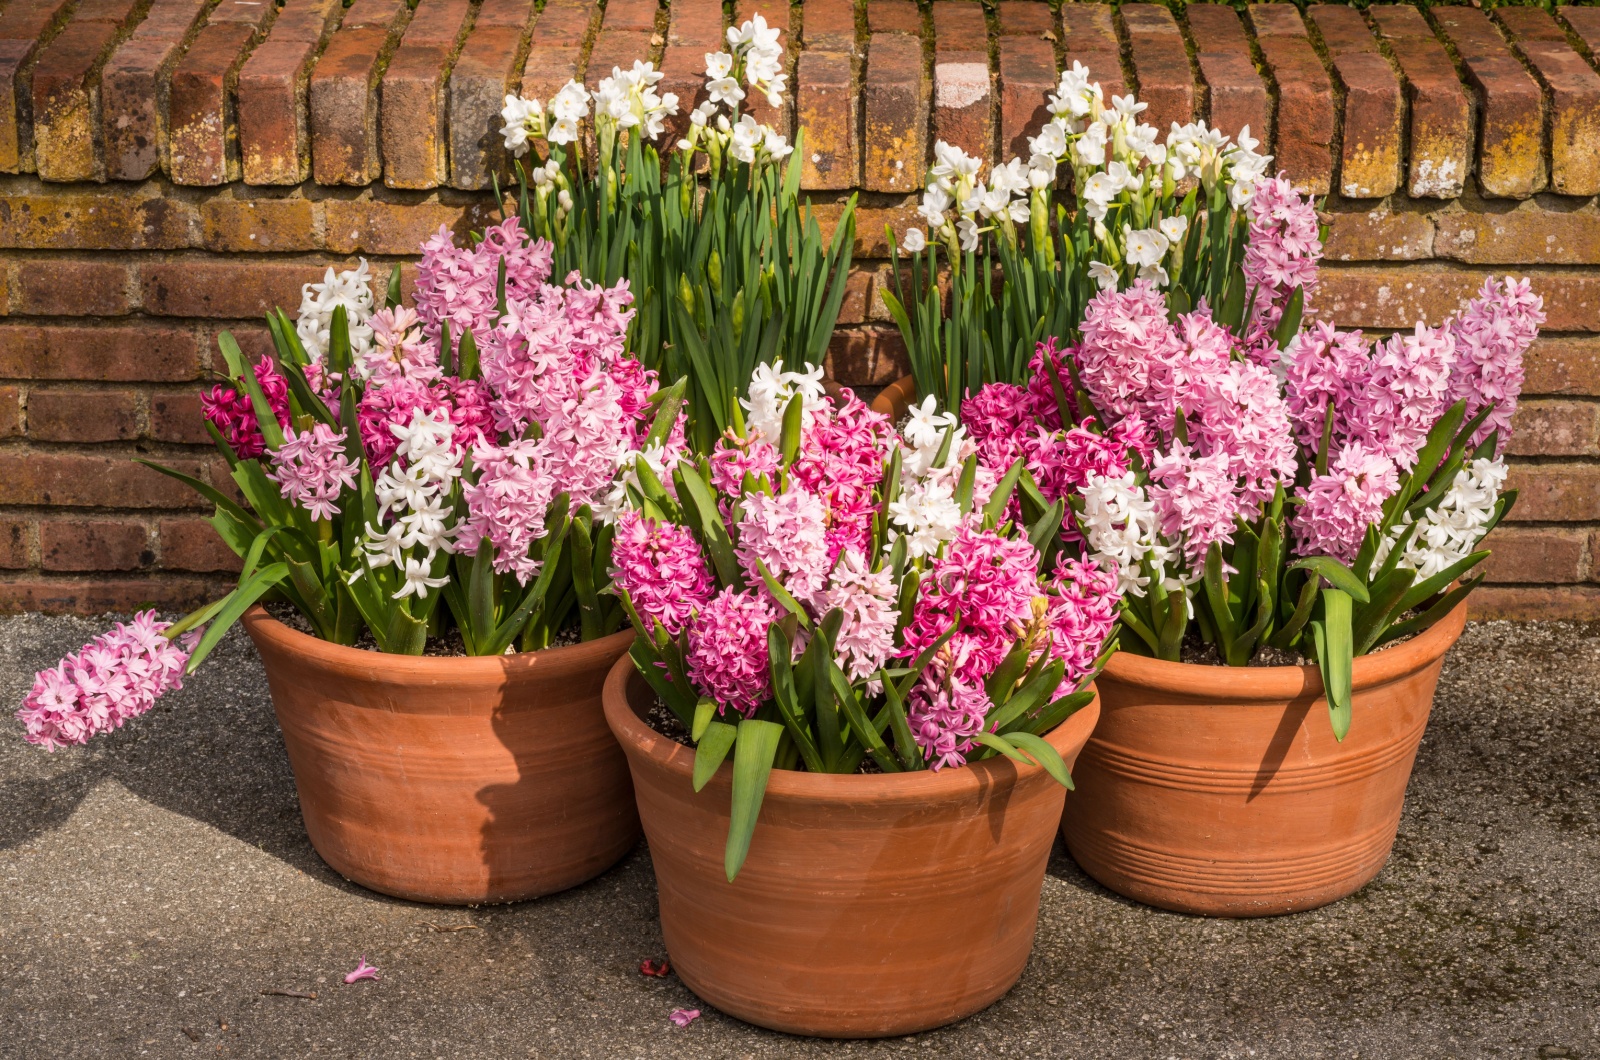 Potted, Blooming Hyacinth in Garden